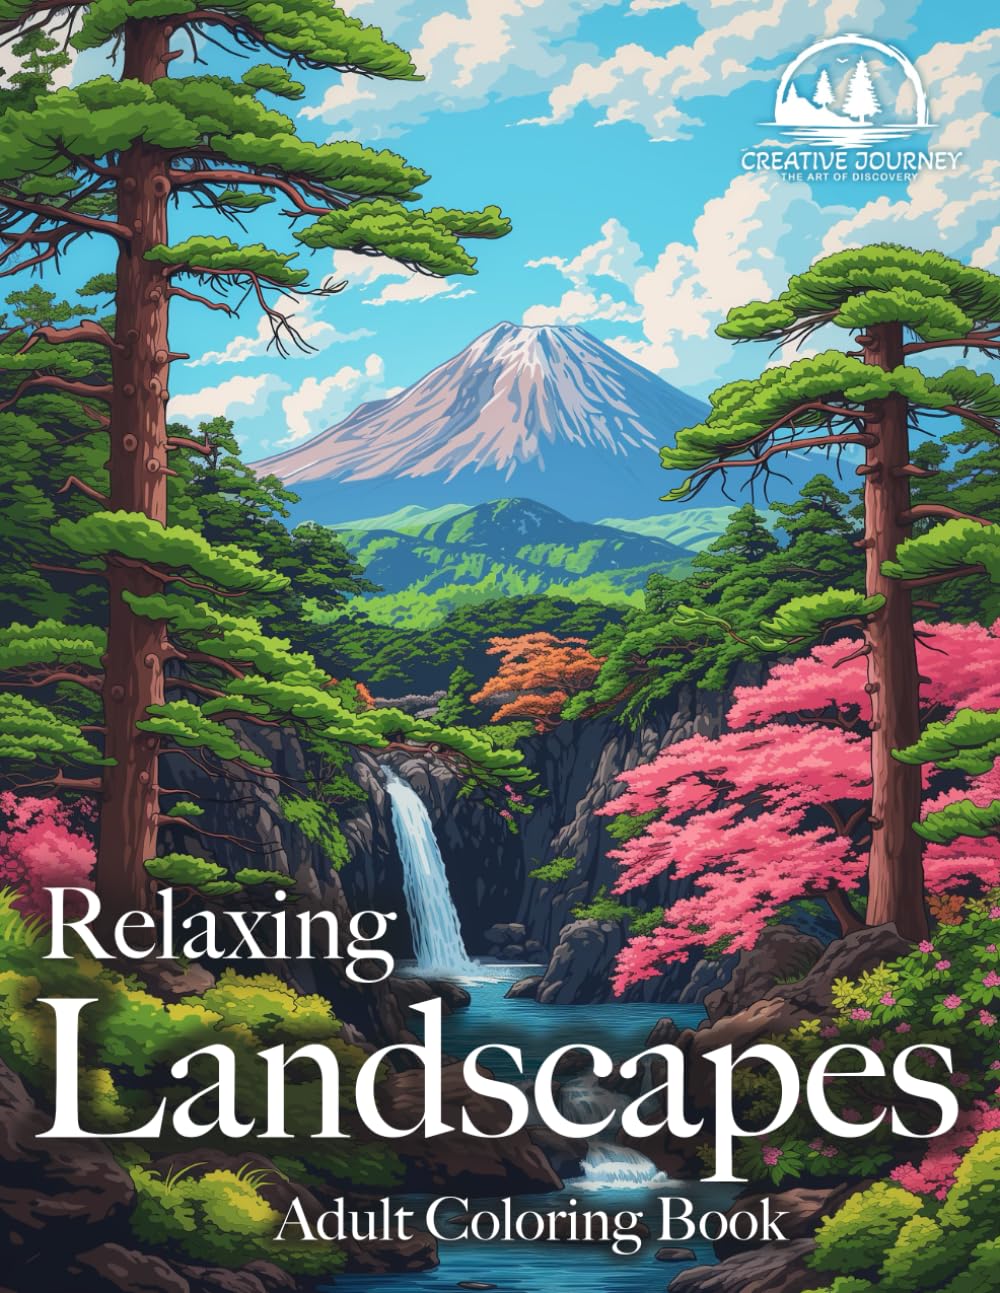 Relaxing Landscapes Adult Coloring Book: World's Most Scenic Nature Wonders